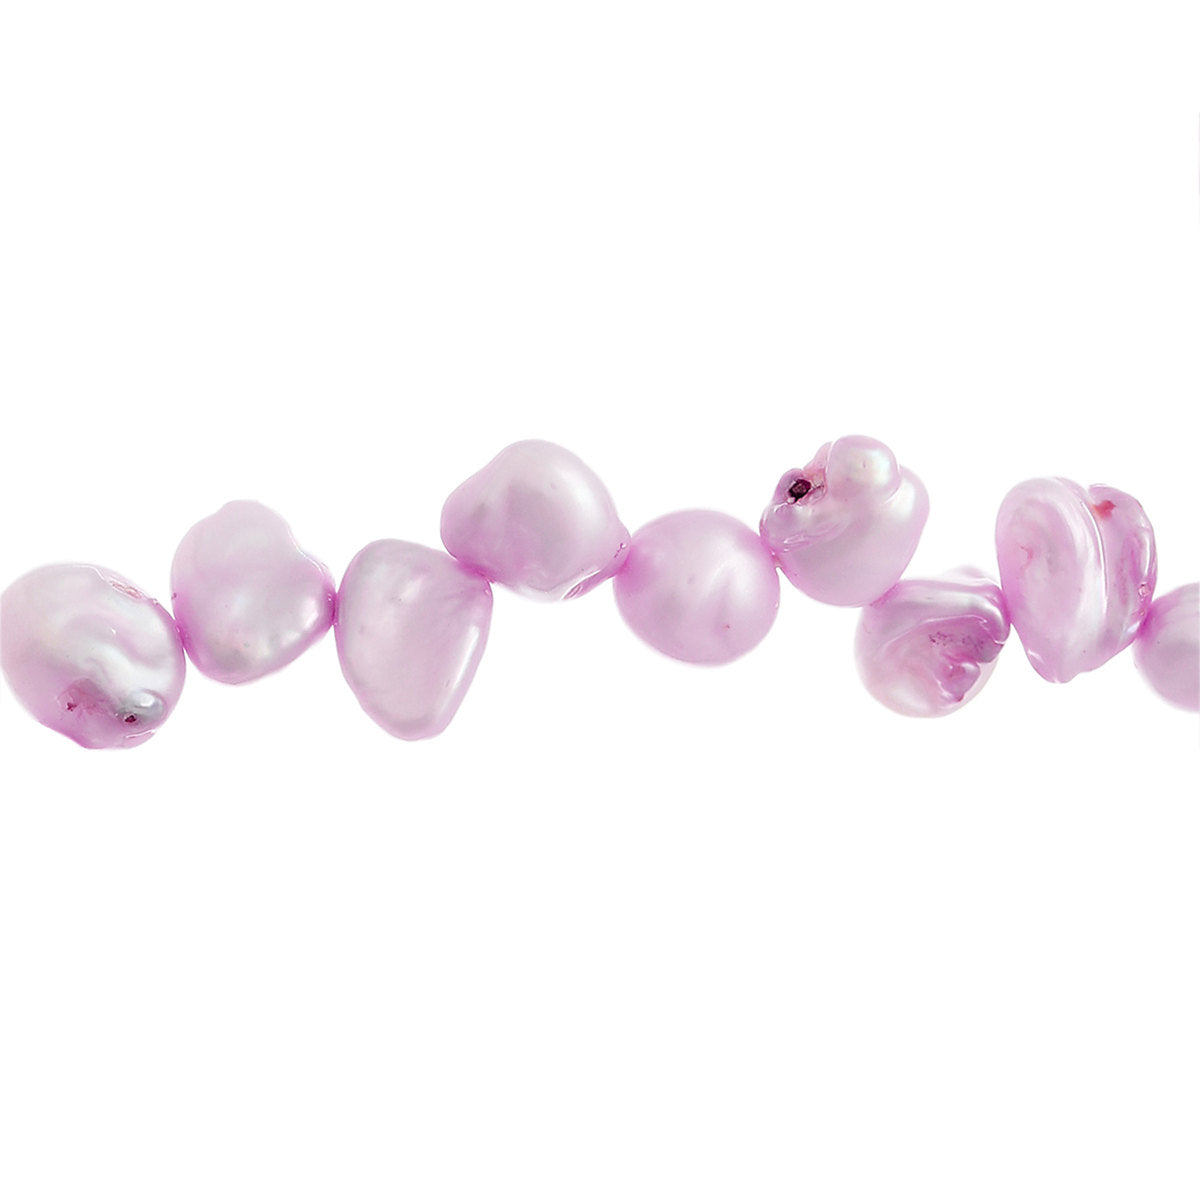 1 Strand (Approx 67 PCs) , Approx 11mm x 8mm, Freshwater Cultured Pearl Loose Beads in Mauve